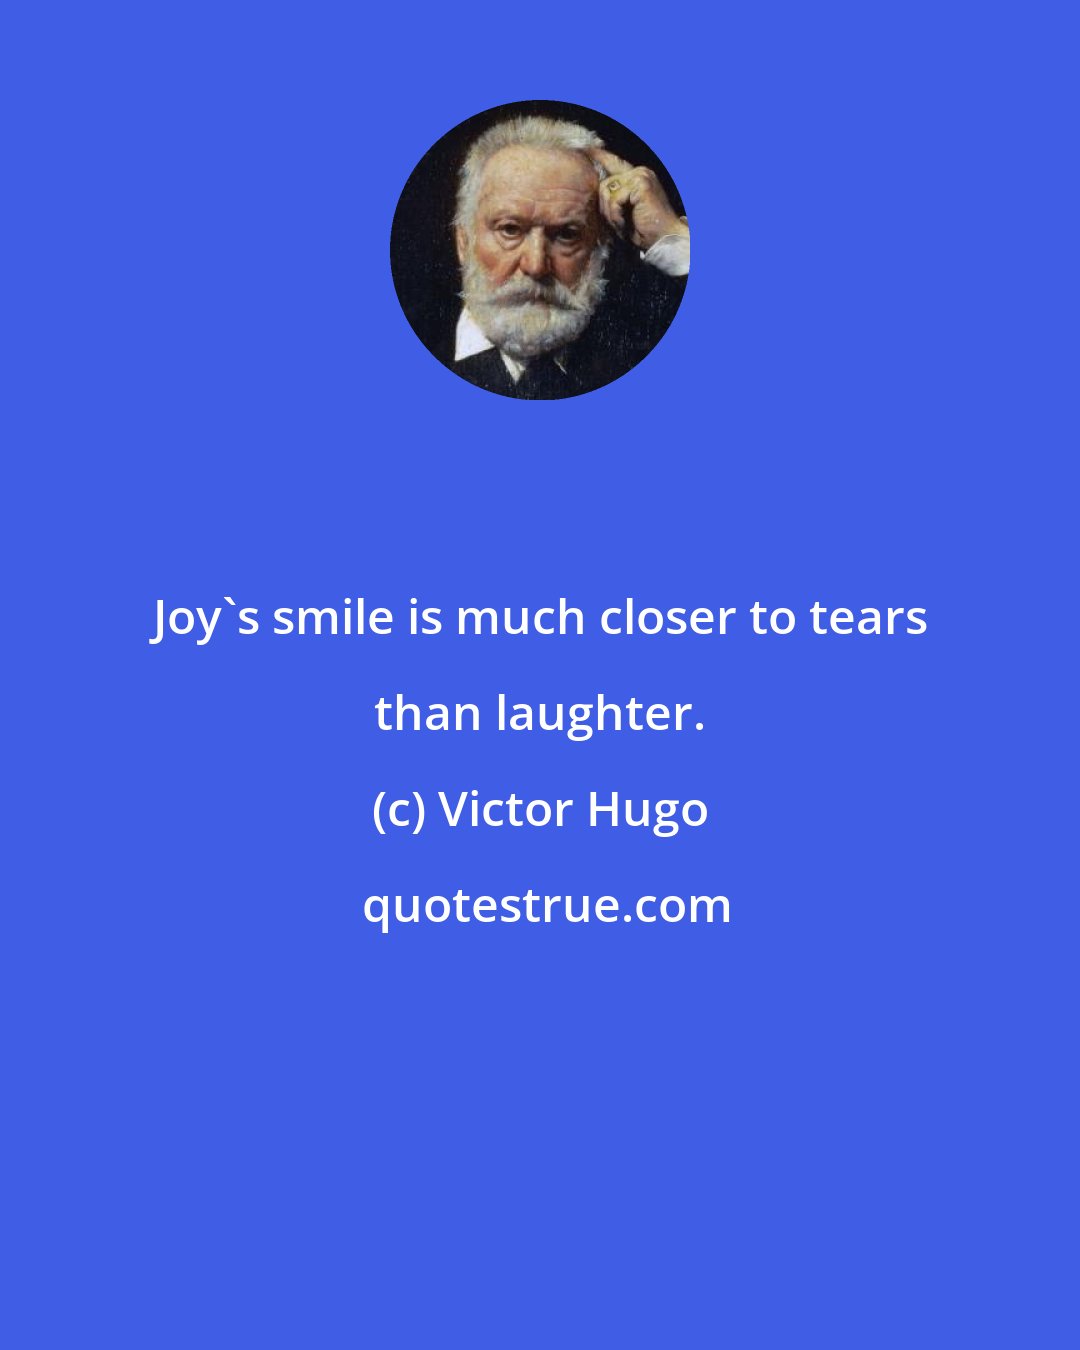 Victor Hugo: Joy's smile is much closer to tears than laughter.